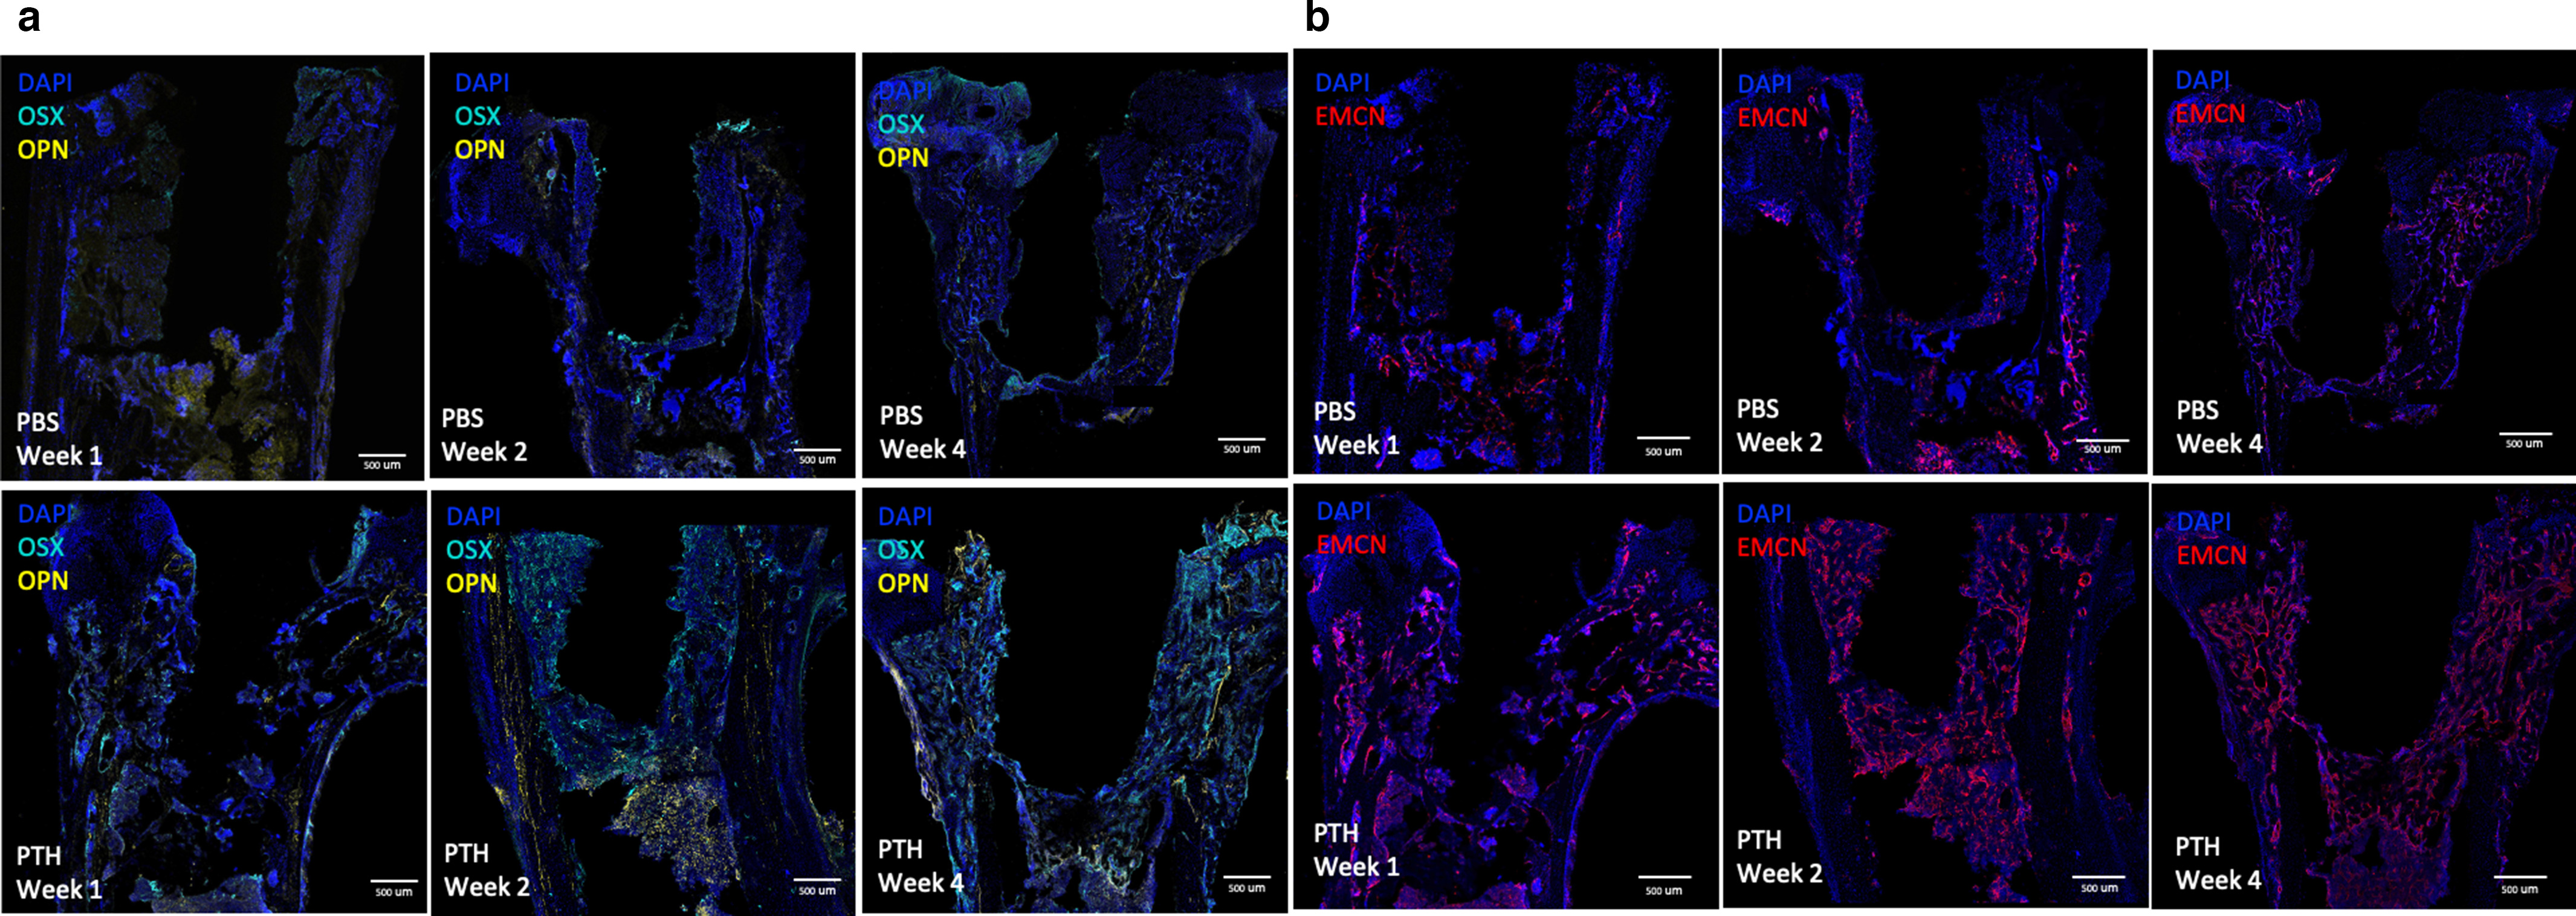 Fig. 4 
          Immunofluorescence staining of phosphate buffered saline (PBS)-control and intermittent parathyroid hormone (iPTH) treatment. a) Minimal progression of peri-implant bone formation is present in the PBS-control group, whereas after two weeks and four weeks of iPTH treatment increases in osterix (OSX), osteopontin (OPN) at distal pedestal region, and b) endomucin (EMCN) expression are detected, indicating angiogenesis around the implant with osseointegration. Scale bars = 500 µm. DAPI, 4,6-diamidino-2-phenylindole.
        